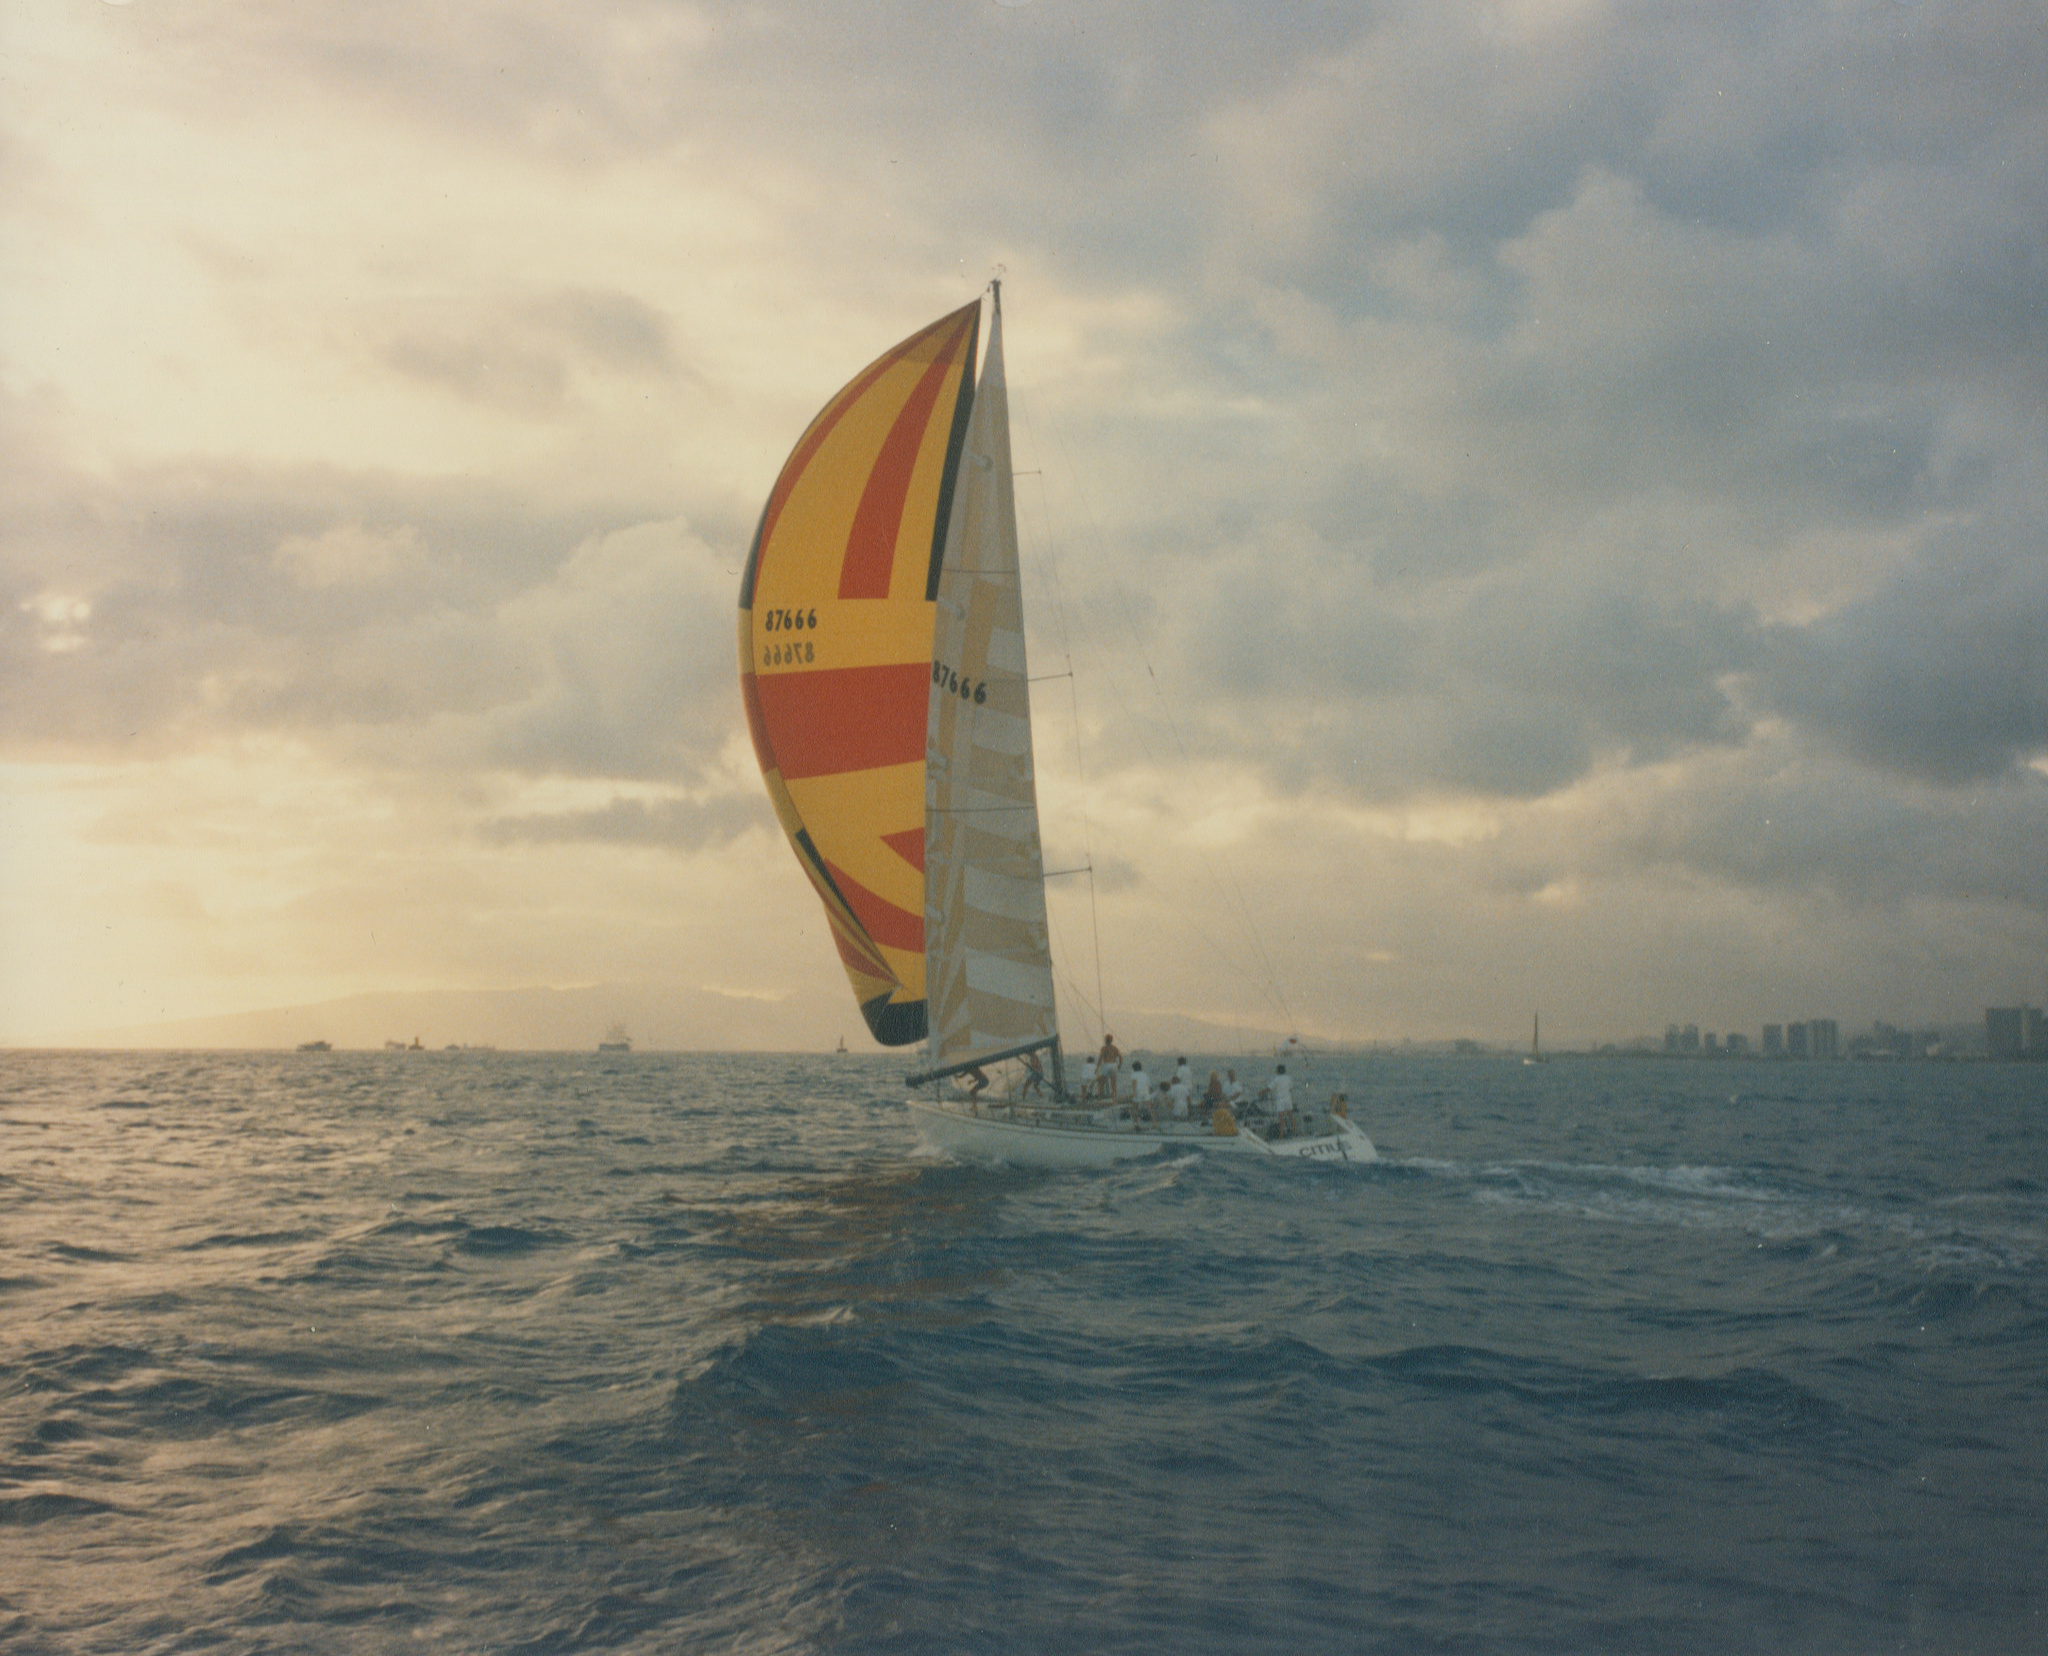 The time it takes for multihull vessels to travel the Transpac distance continues to decline, reaching 8.5 days. In 1987, the fastest boat of its kind was again Merlin, driven by skipper Donn Campion. The boat arrives at the finish 8 days, 12 hours and 40 seconds after the start. However, the current record cannot be broken: the 1977 Merlin crew result was exactly one hour better.